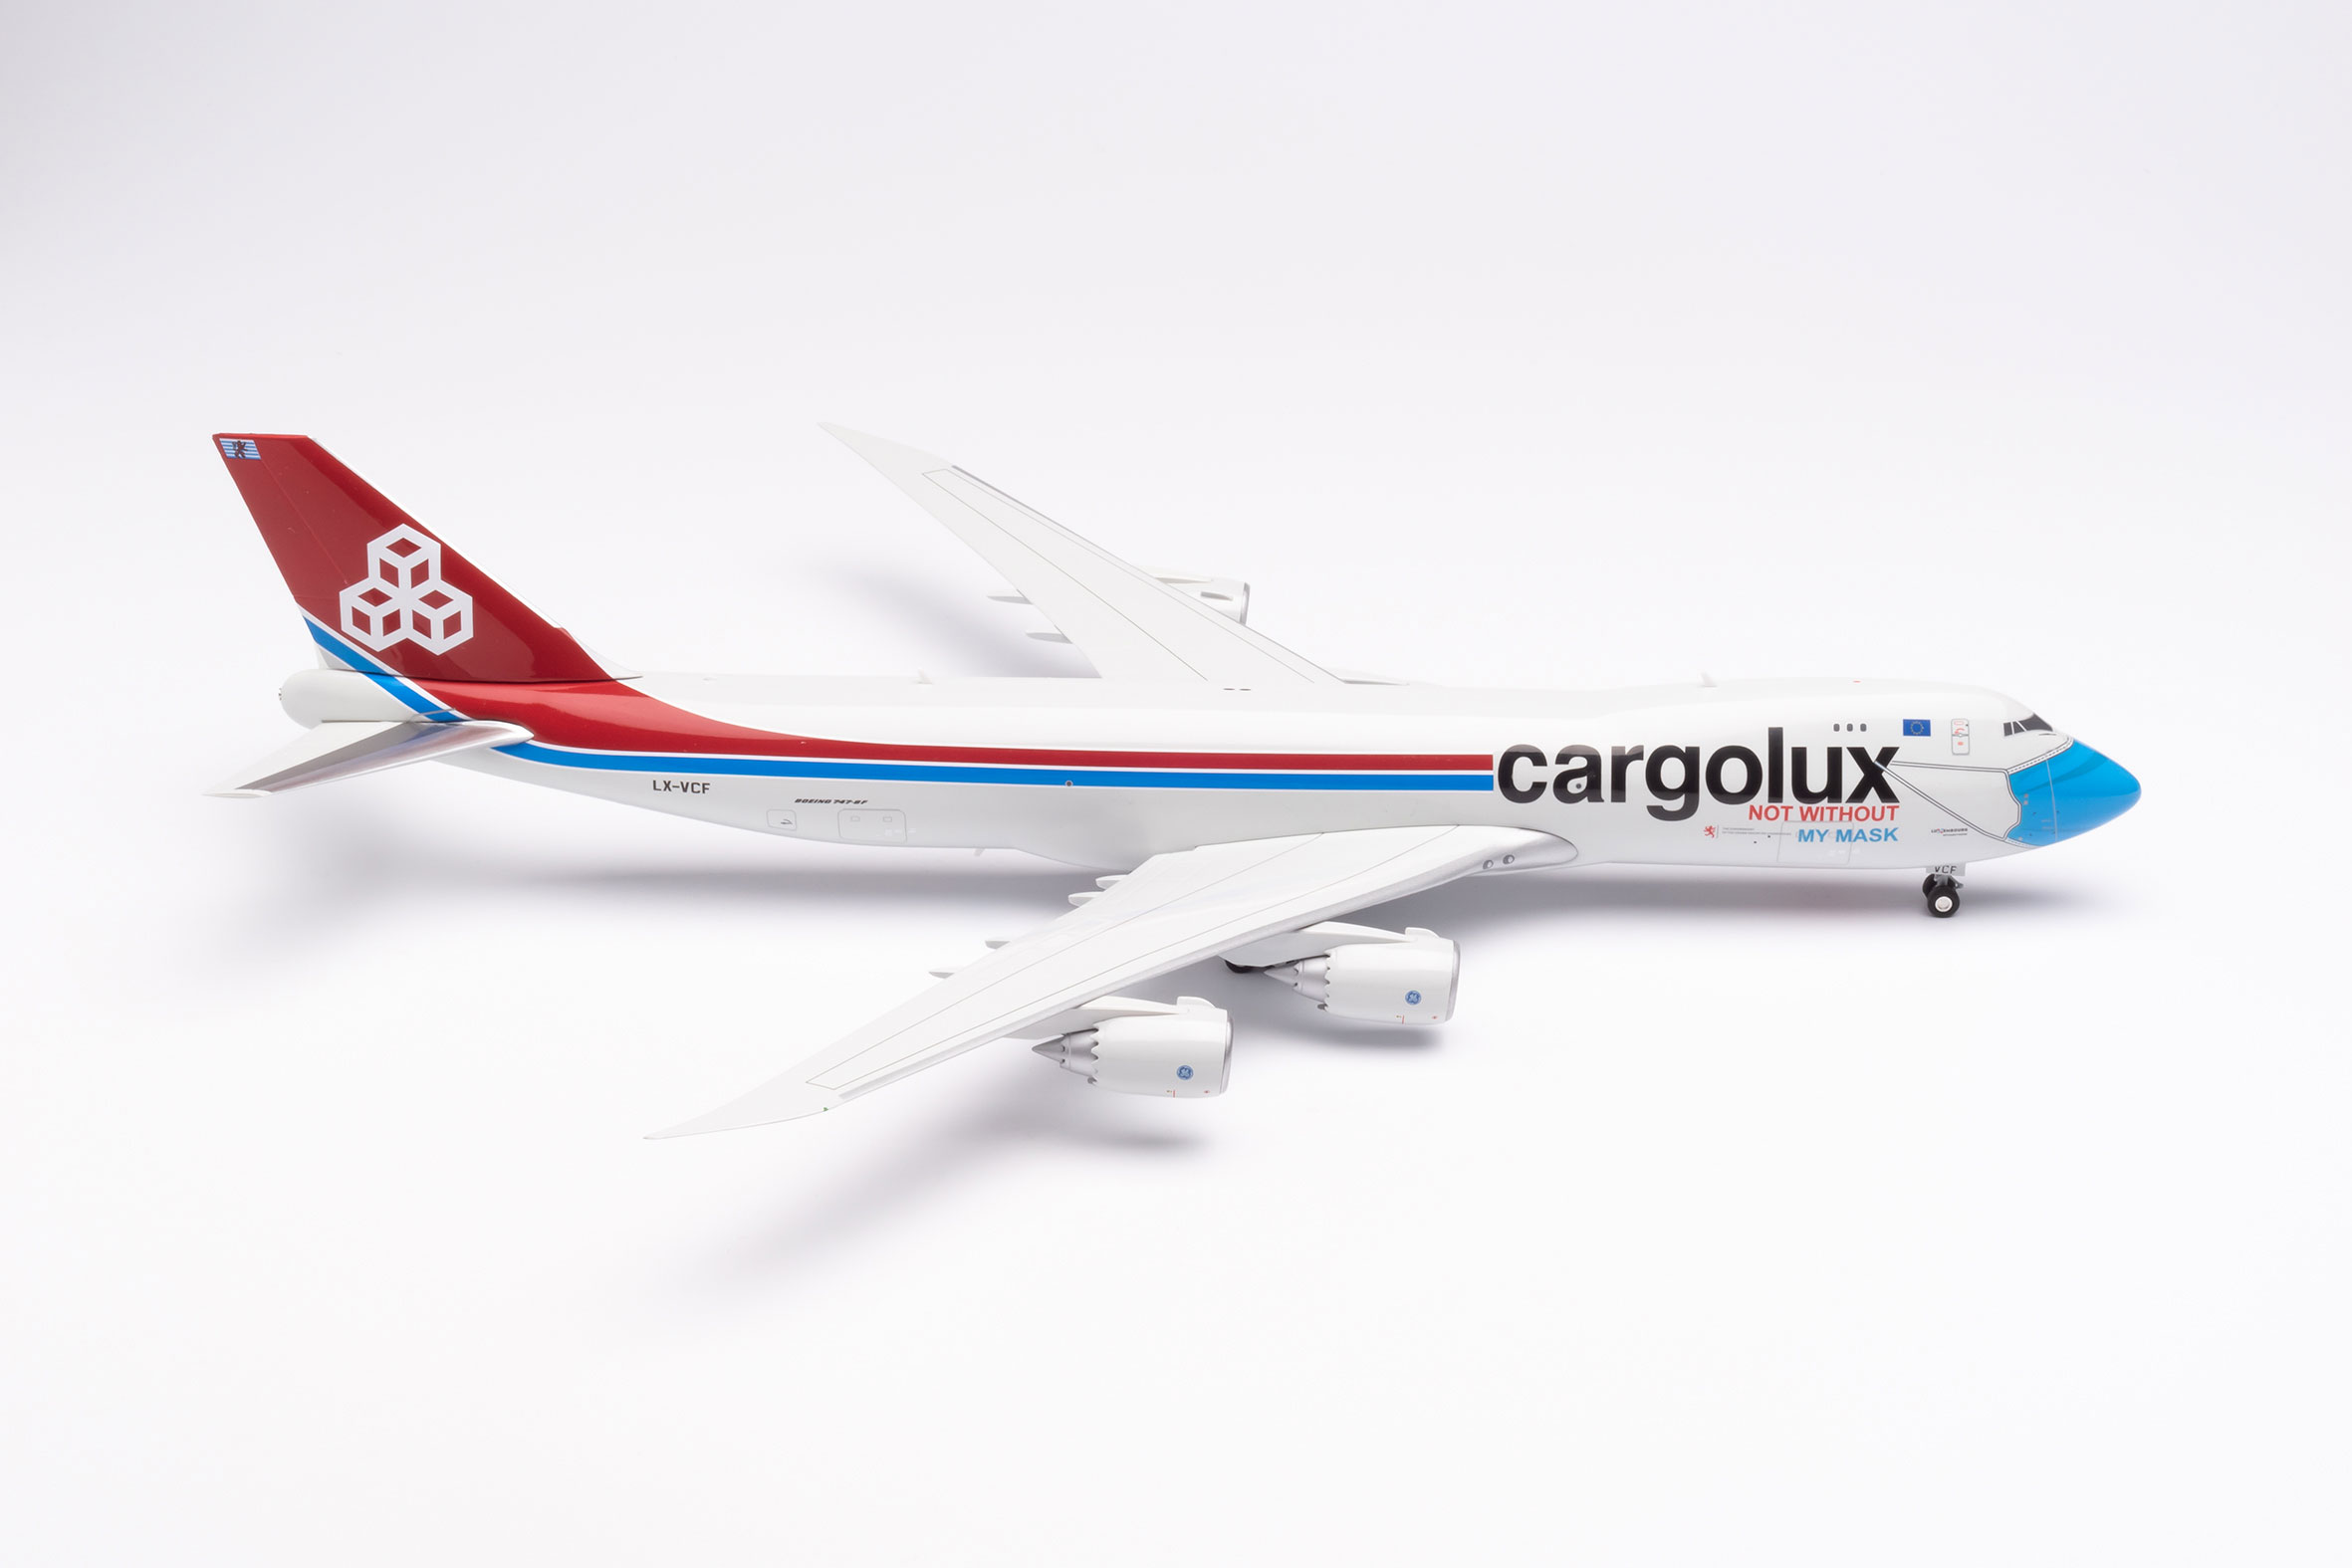 Flight Miniatures Cargolux Airlines Boeing 747-400 1:250 Scale Display Model with Stand